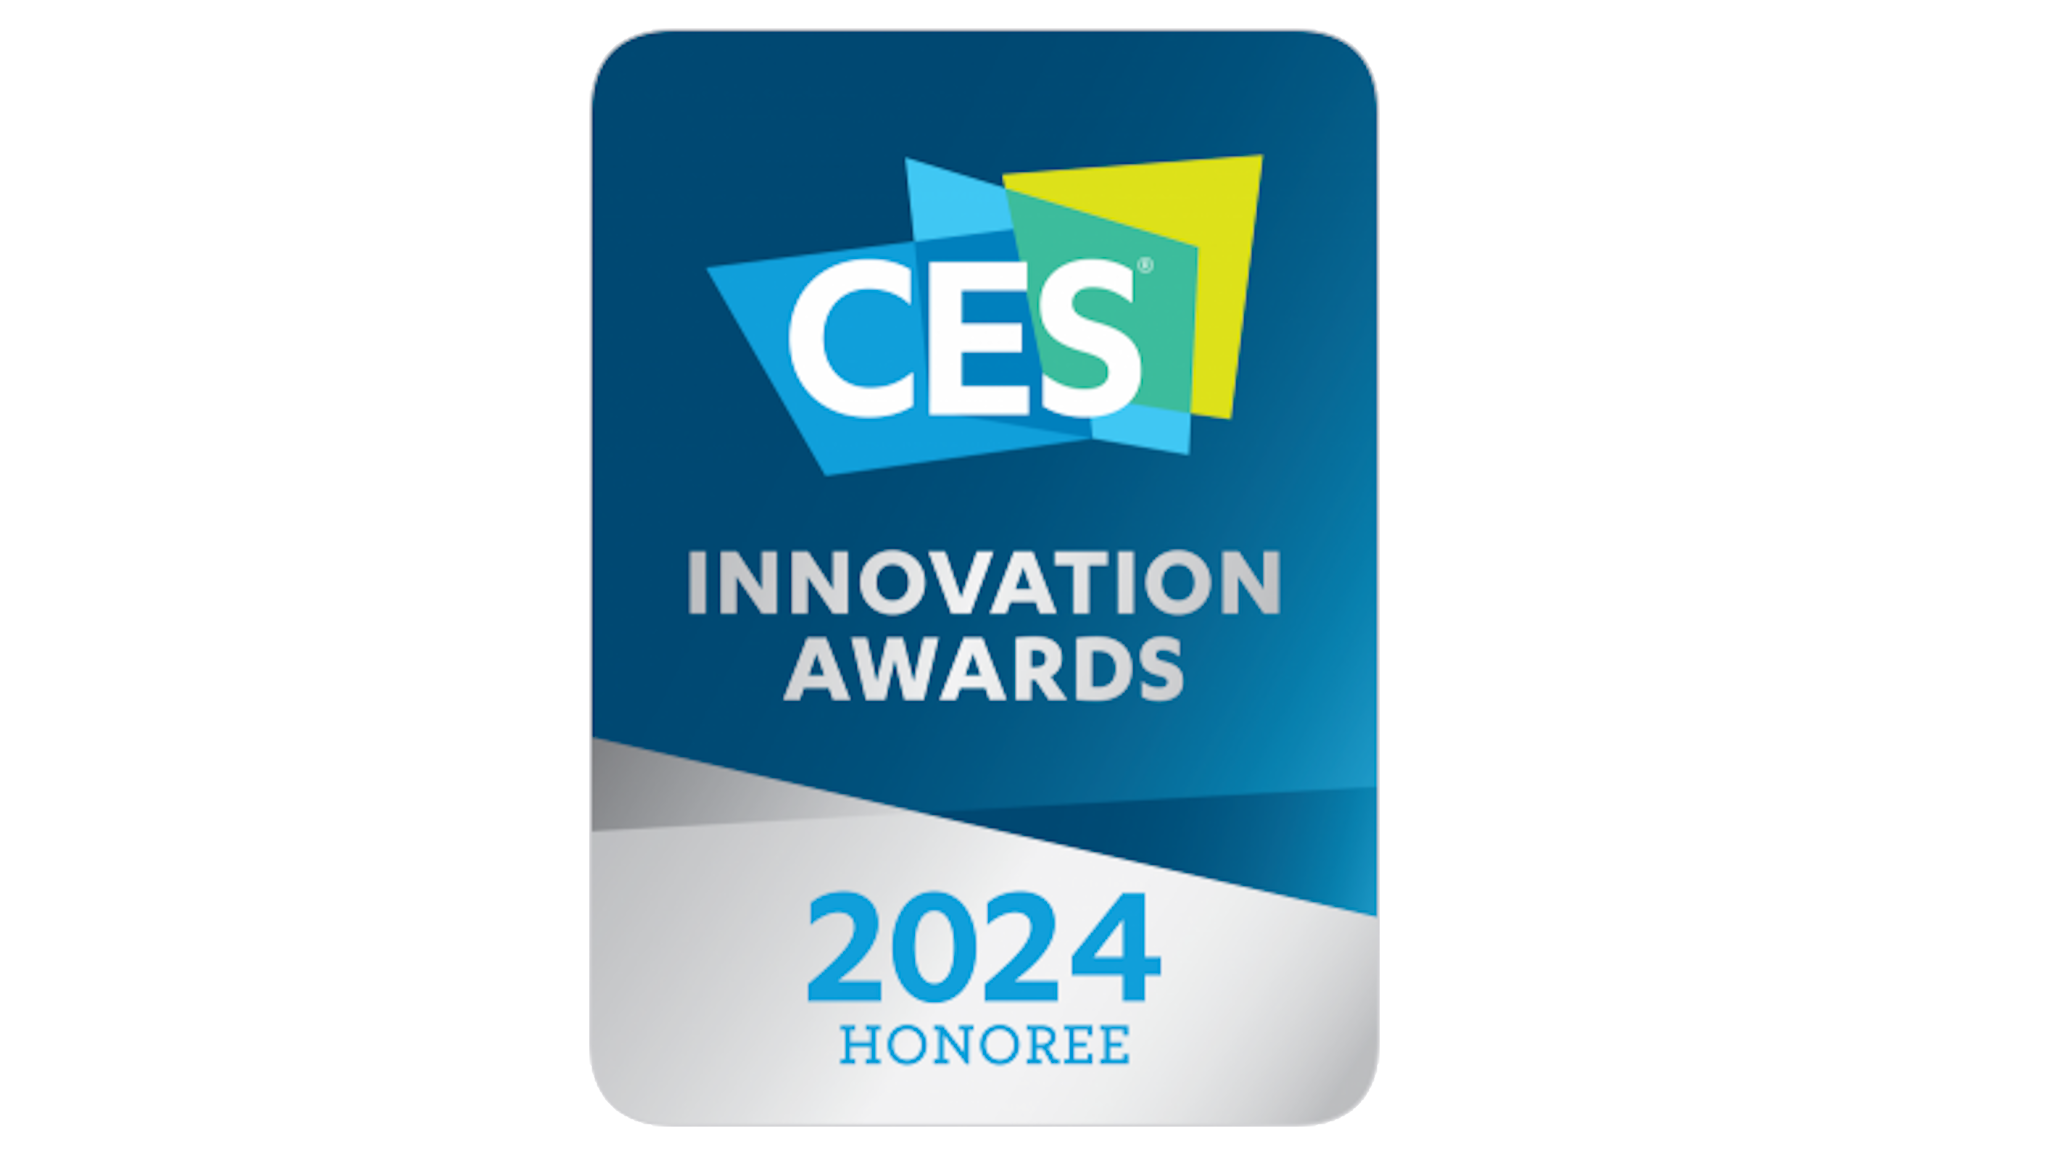 Aurora Labs has been named a CES® 2024 Innovation Awards honoree